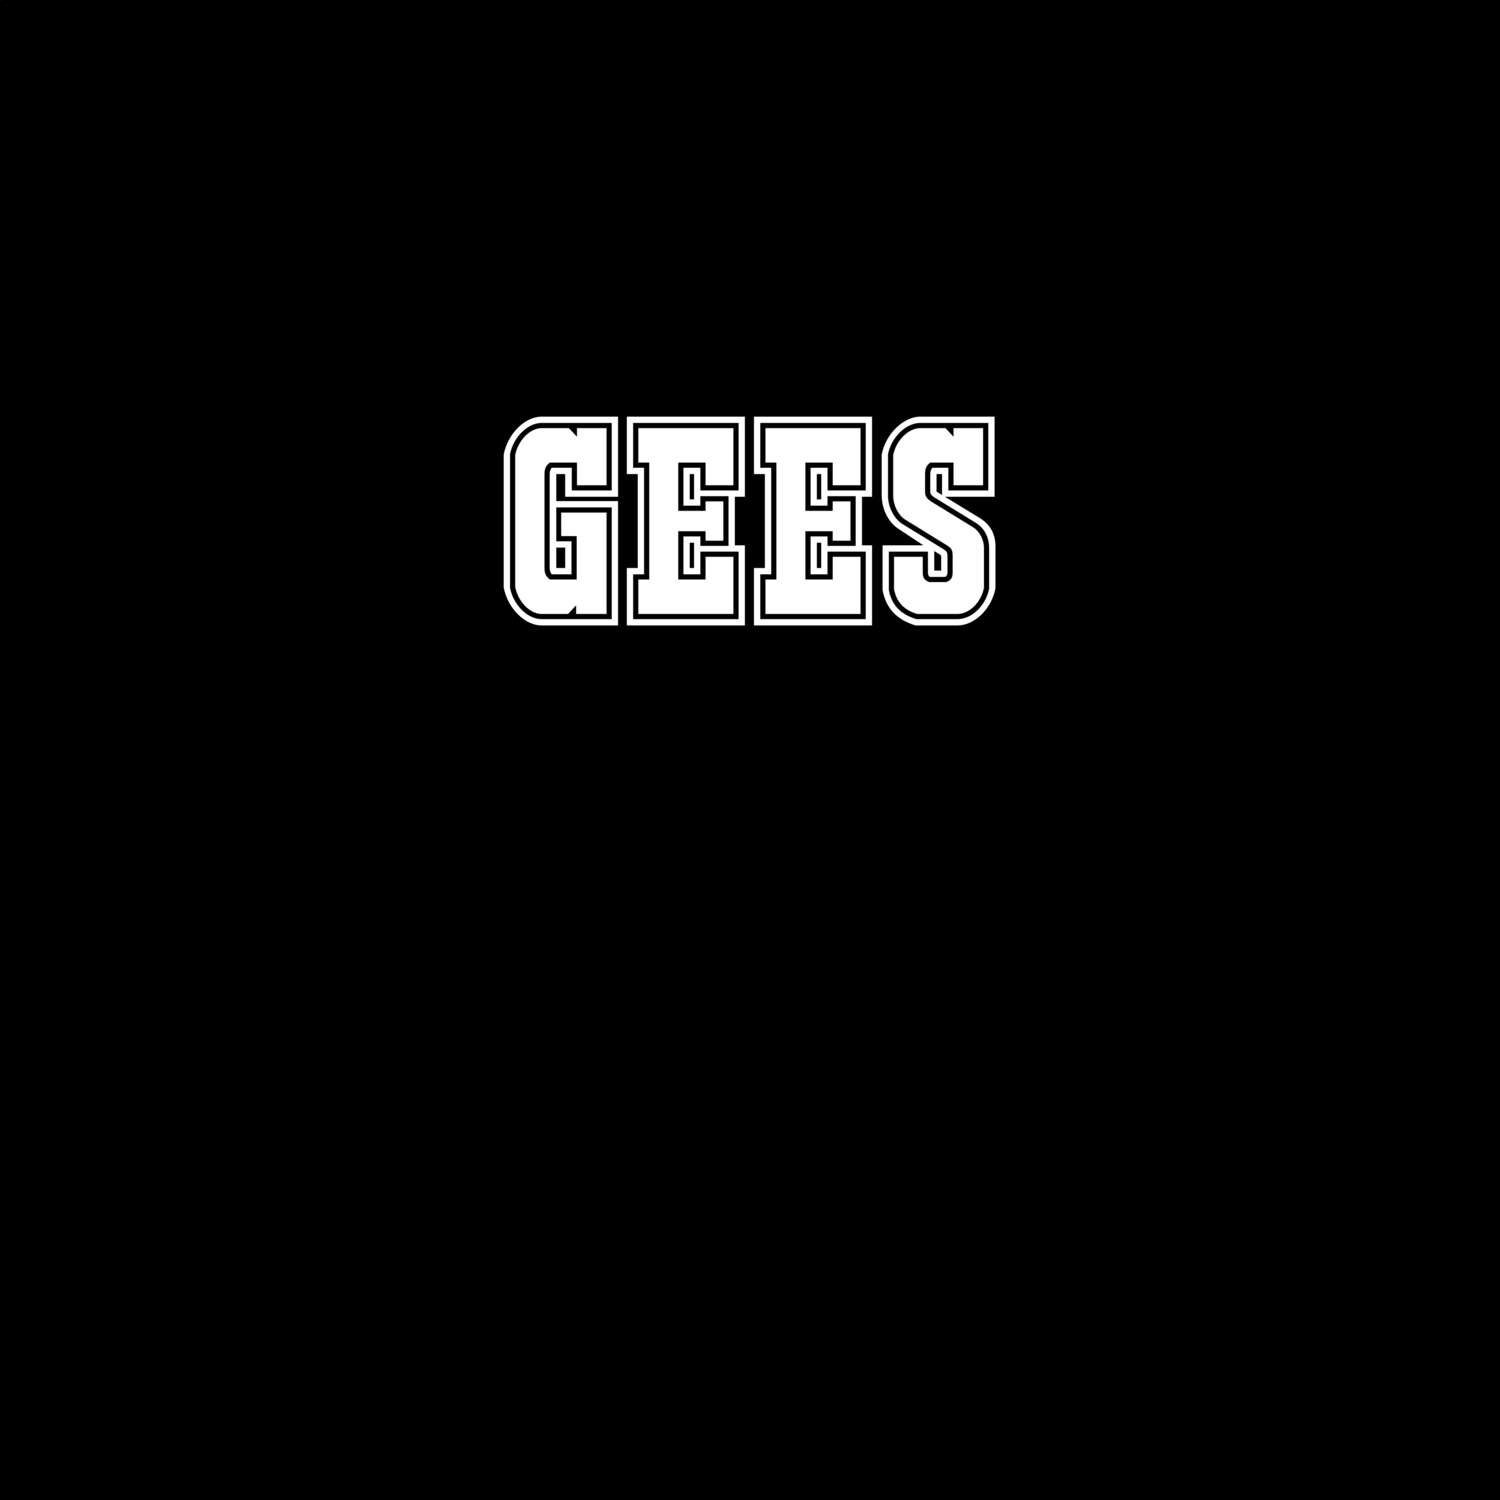 Gees T-Shirt »Classic«